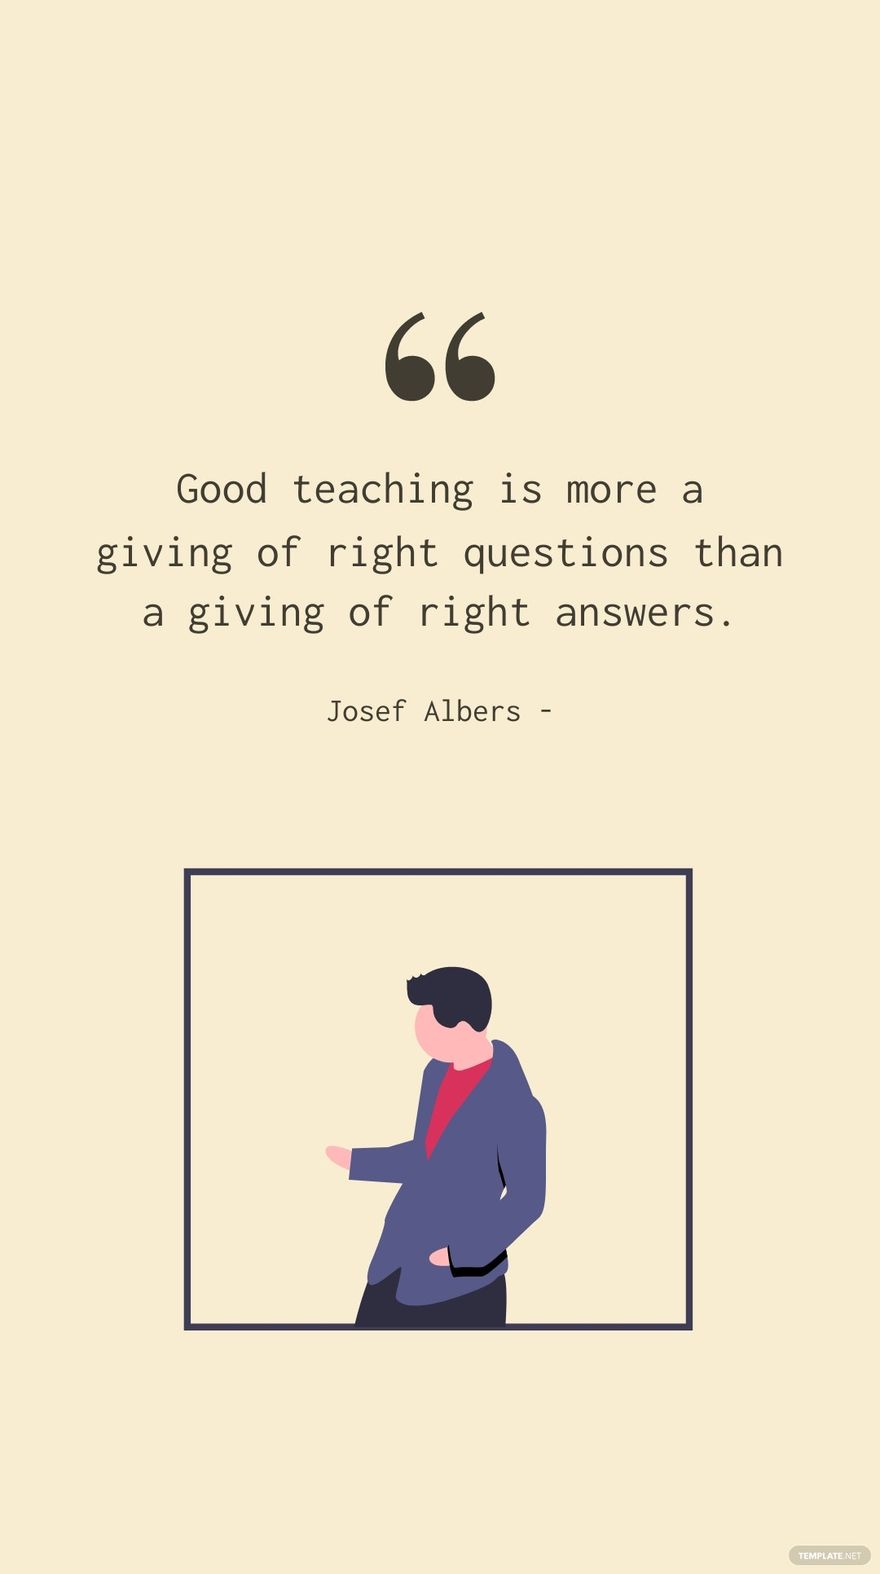 Josef Albers - Good teaching is more a giving of right questions than a giving of right answers.